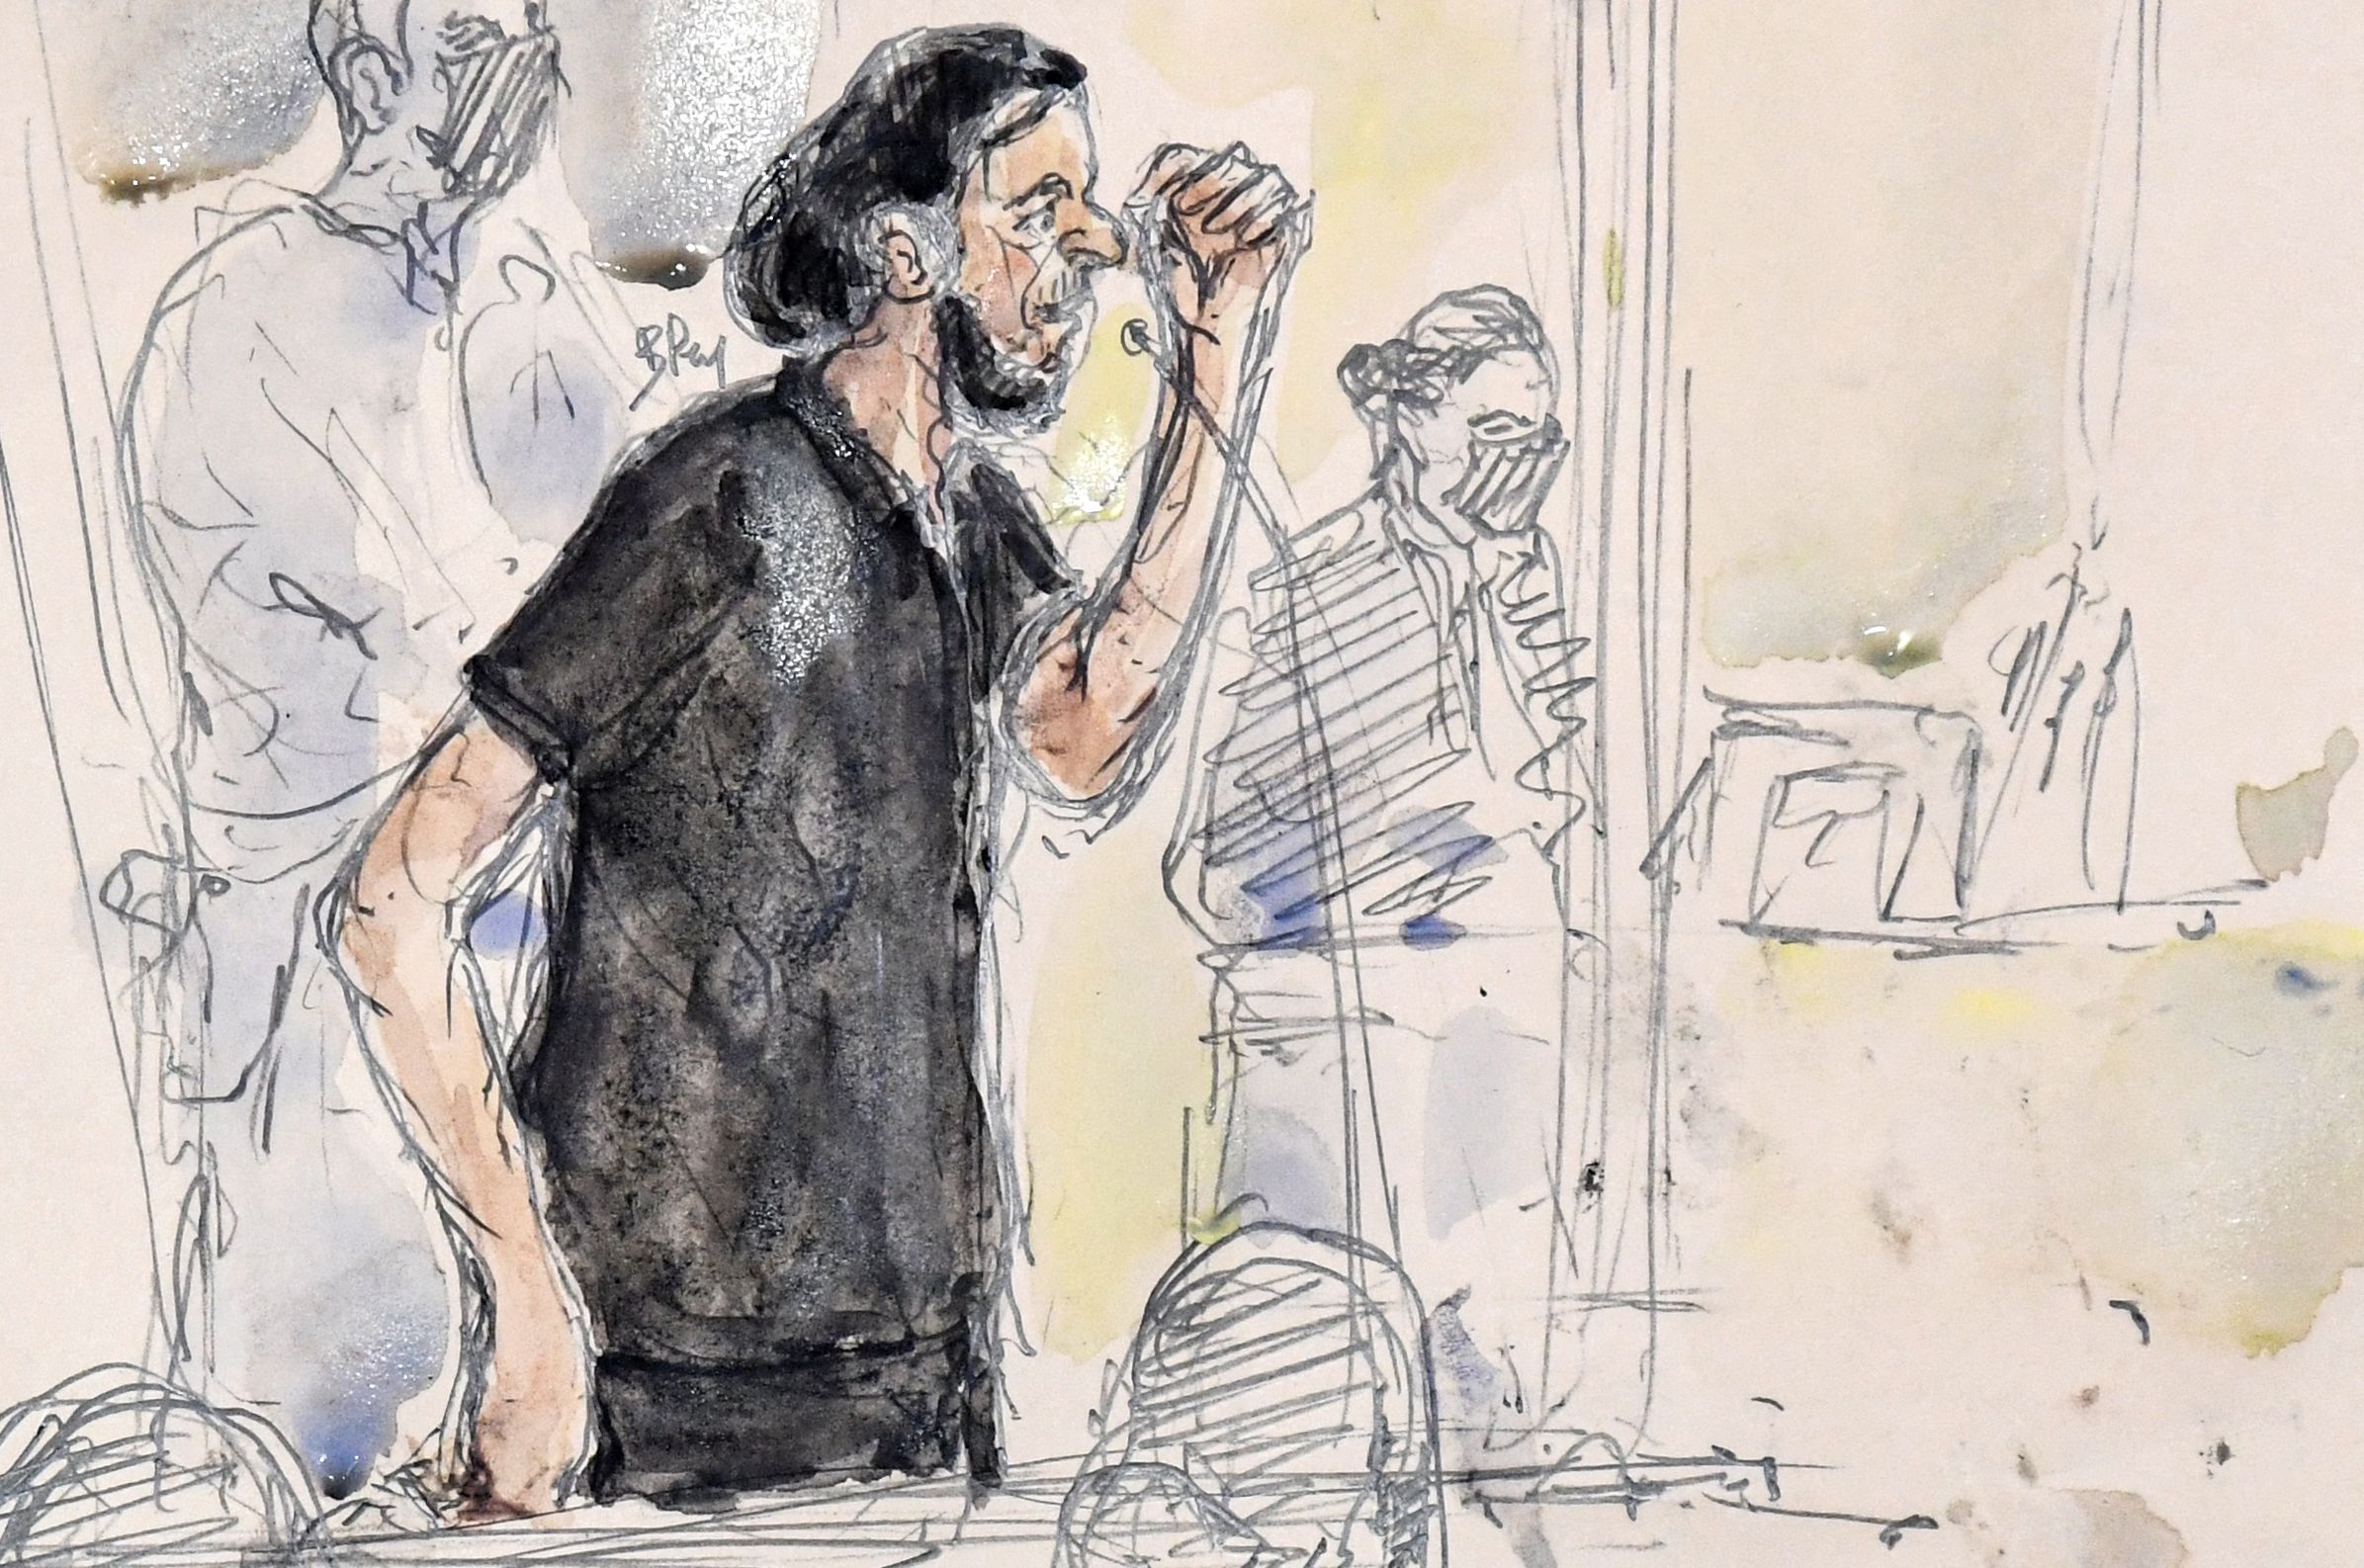 PARIS: This court sketch made yesterday shows Salah Abdeslam, the last surviving member of the jihadist cell of the Nov 2015 Paris attacks, during the first day of trial. – AFP n